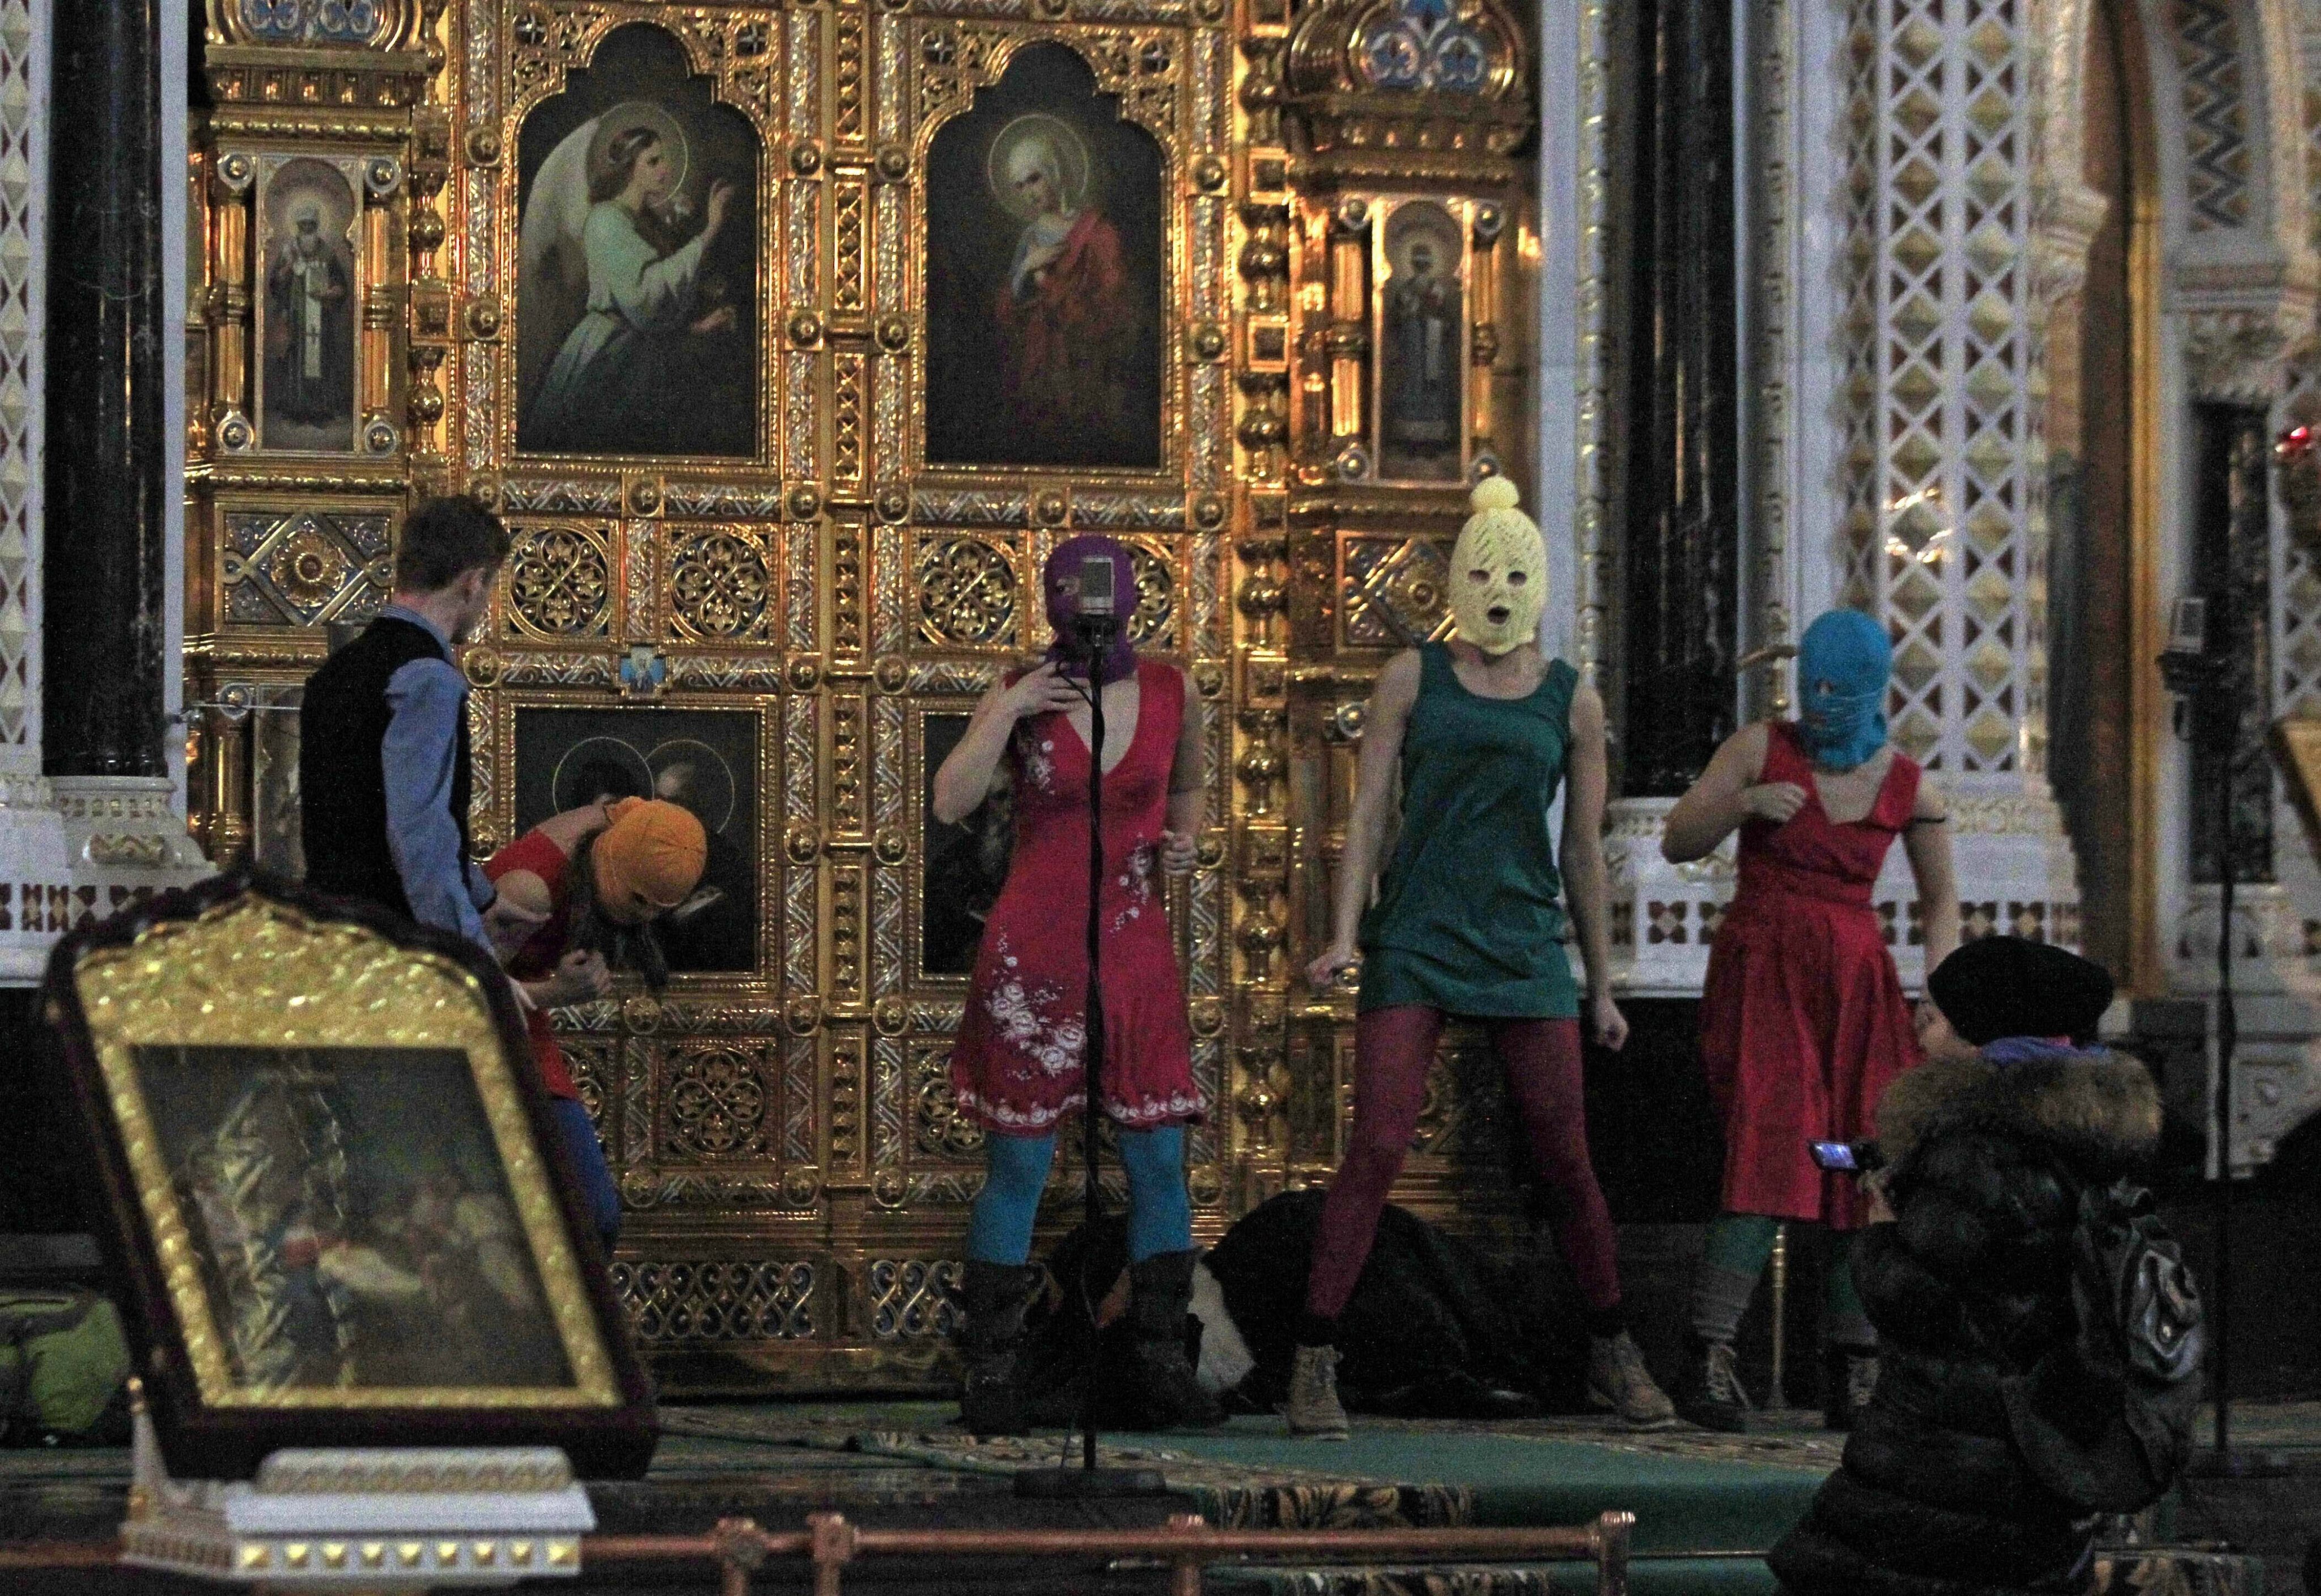 Masked members of Russian feminist group Pussy Riot protest inside the Christ the Savior Cathedral in Moscow in 2012. On Wednesday, Russia sentenced band member Lyusya Shtein to six years in prison in absentia for anti-war social media posts. Photo: AP